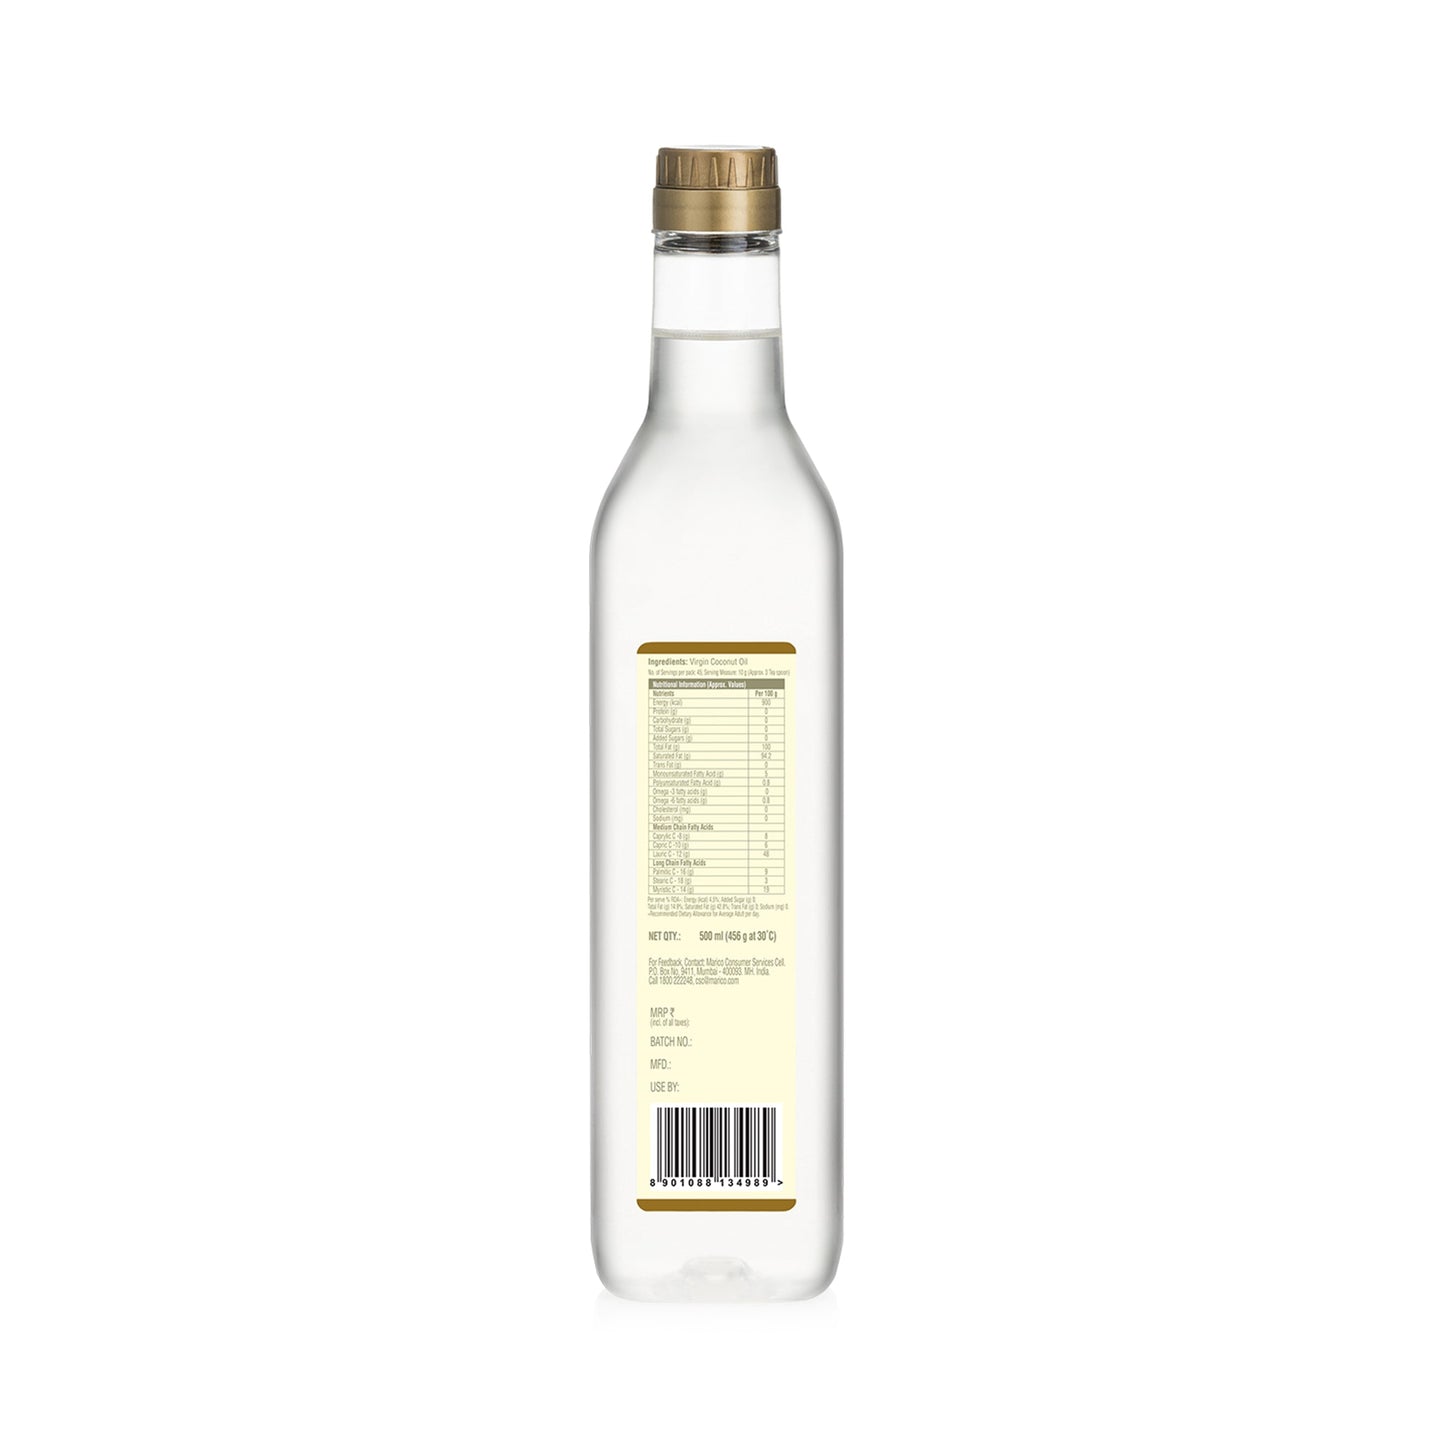 Cold Pressed Natural Virgin Coconut Oil  From the makers of Parachute  500 ml